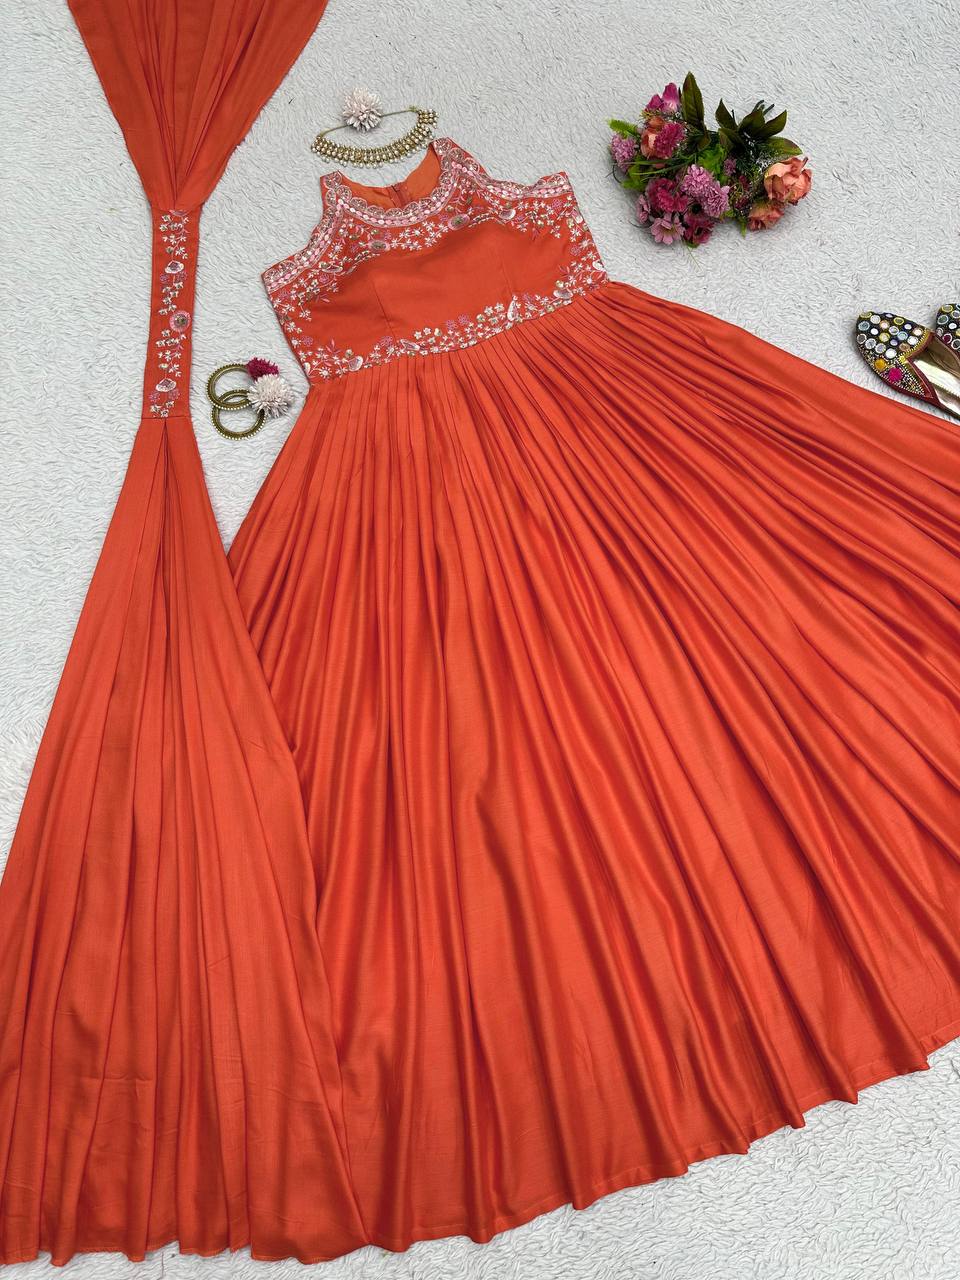 New Long Flair Orange Gown Functional Occasion Wear